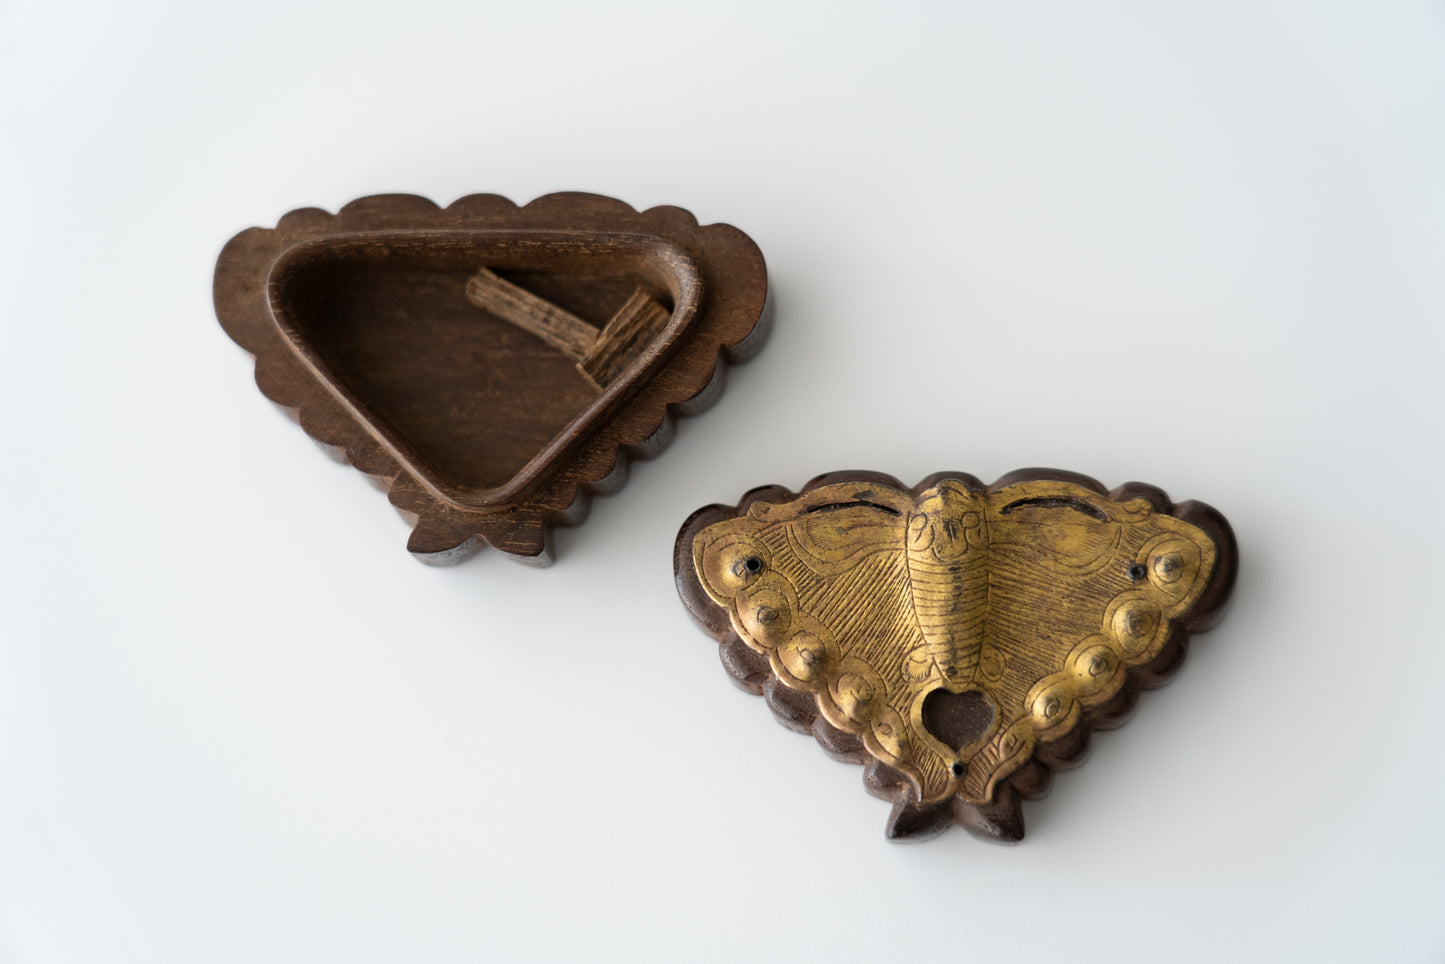 Butterfly shaped fittings incense container from wrapper of buddhist scripture Jingoji Issai-kyo